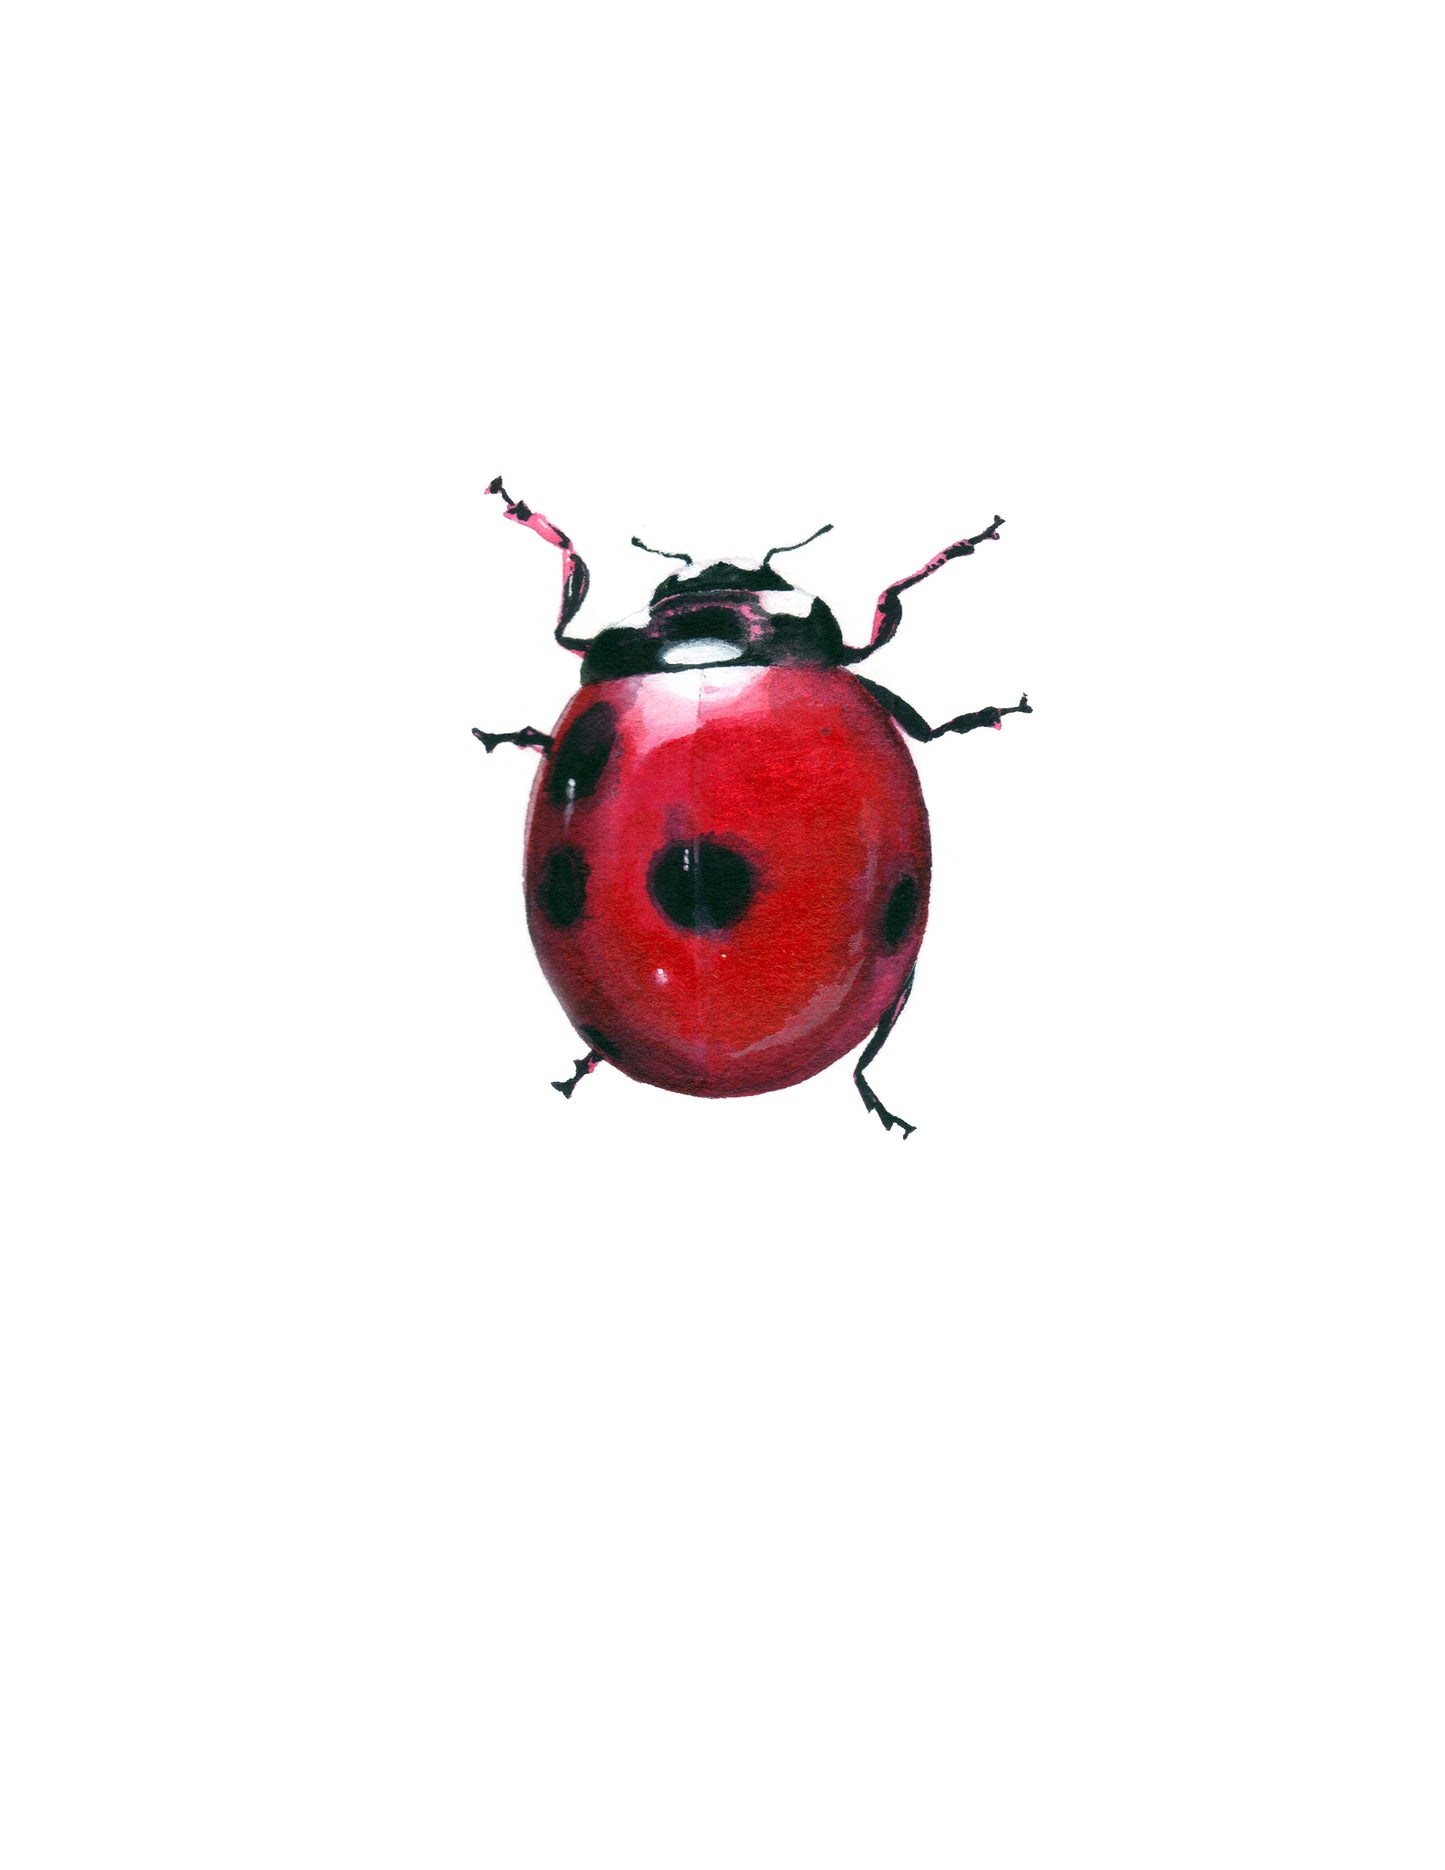 Seven-Spotted Lady Beetle print